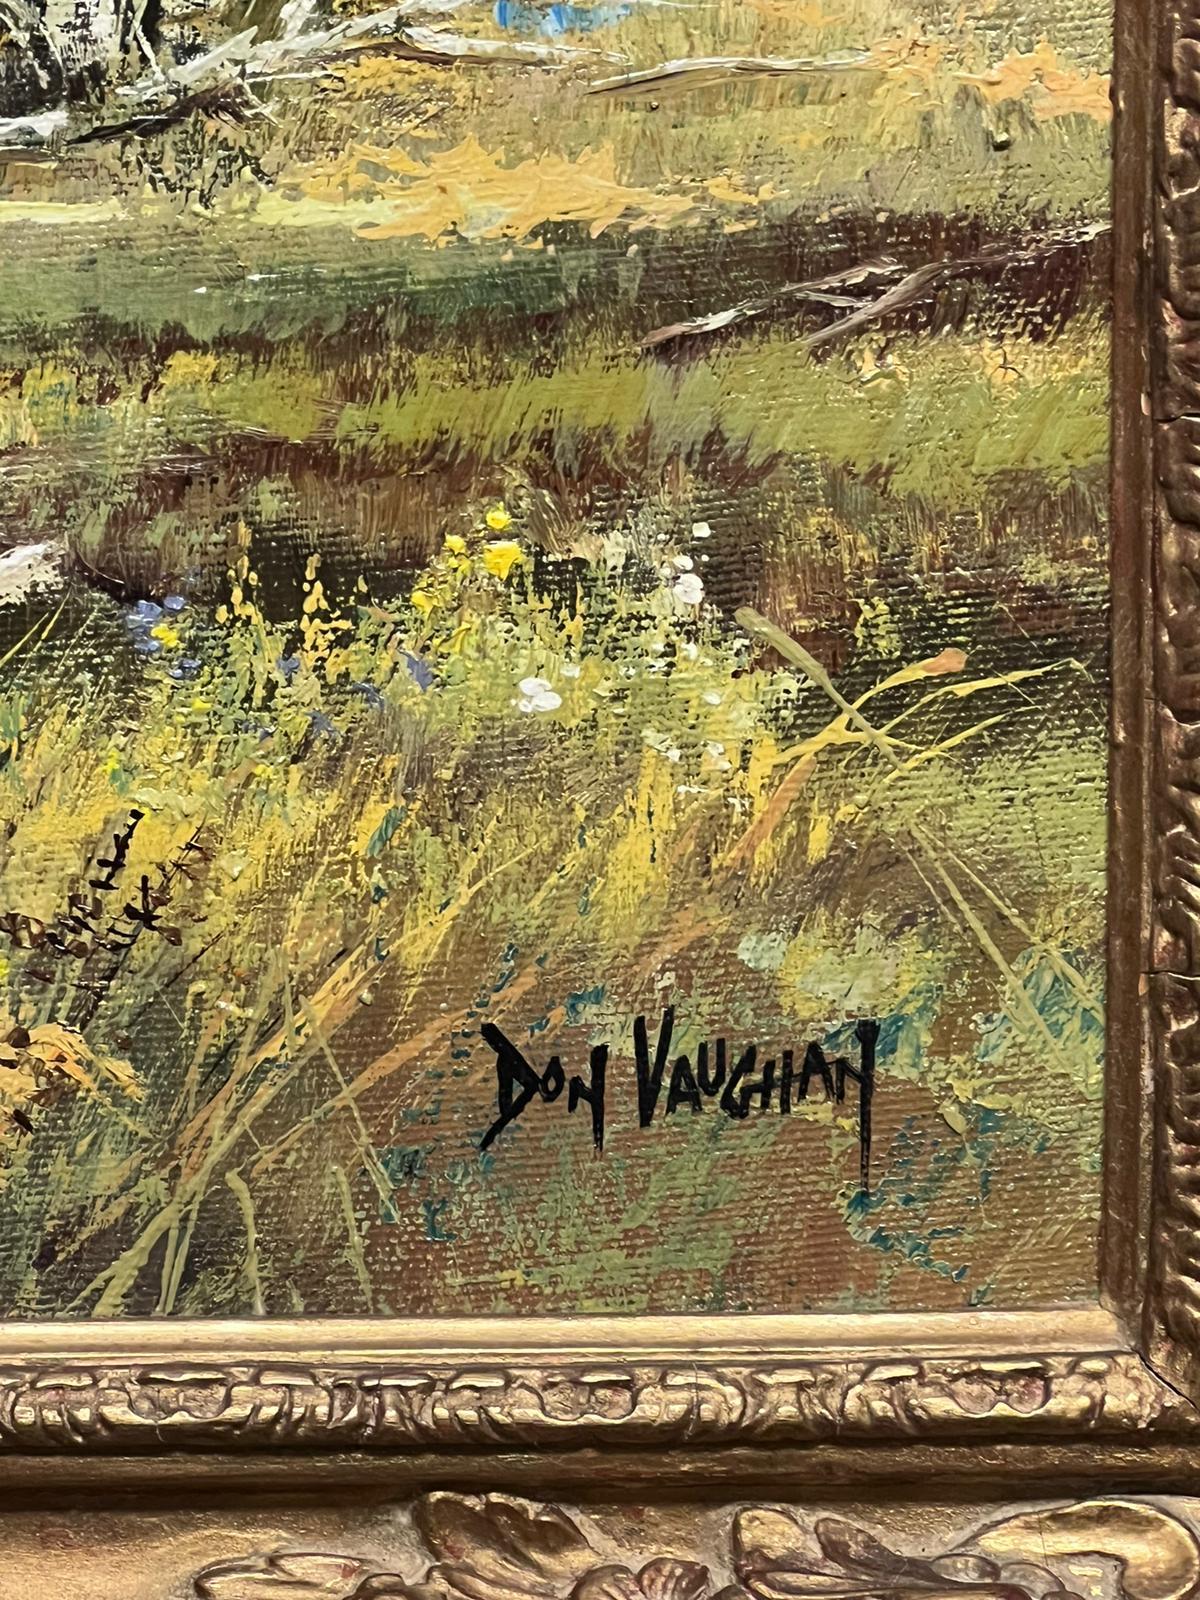 Summer Meadows
by Don Vaughan (British 20th century), * see notes belowe
signed oil on canvas, framed in elaborate gilt frame
framed: 28.5 x 40.5 inches
canvas: 25 x 36 inches
provenance: private collection, the Cotswolds, England
condition: very